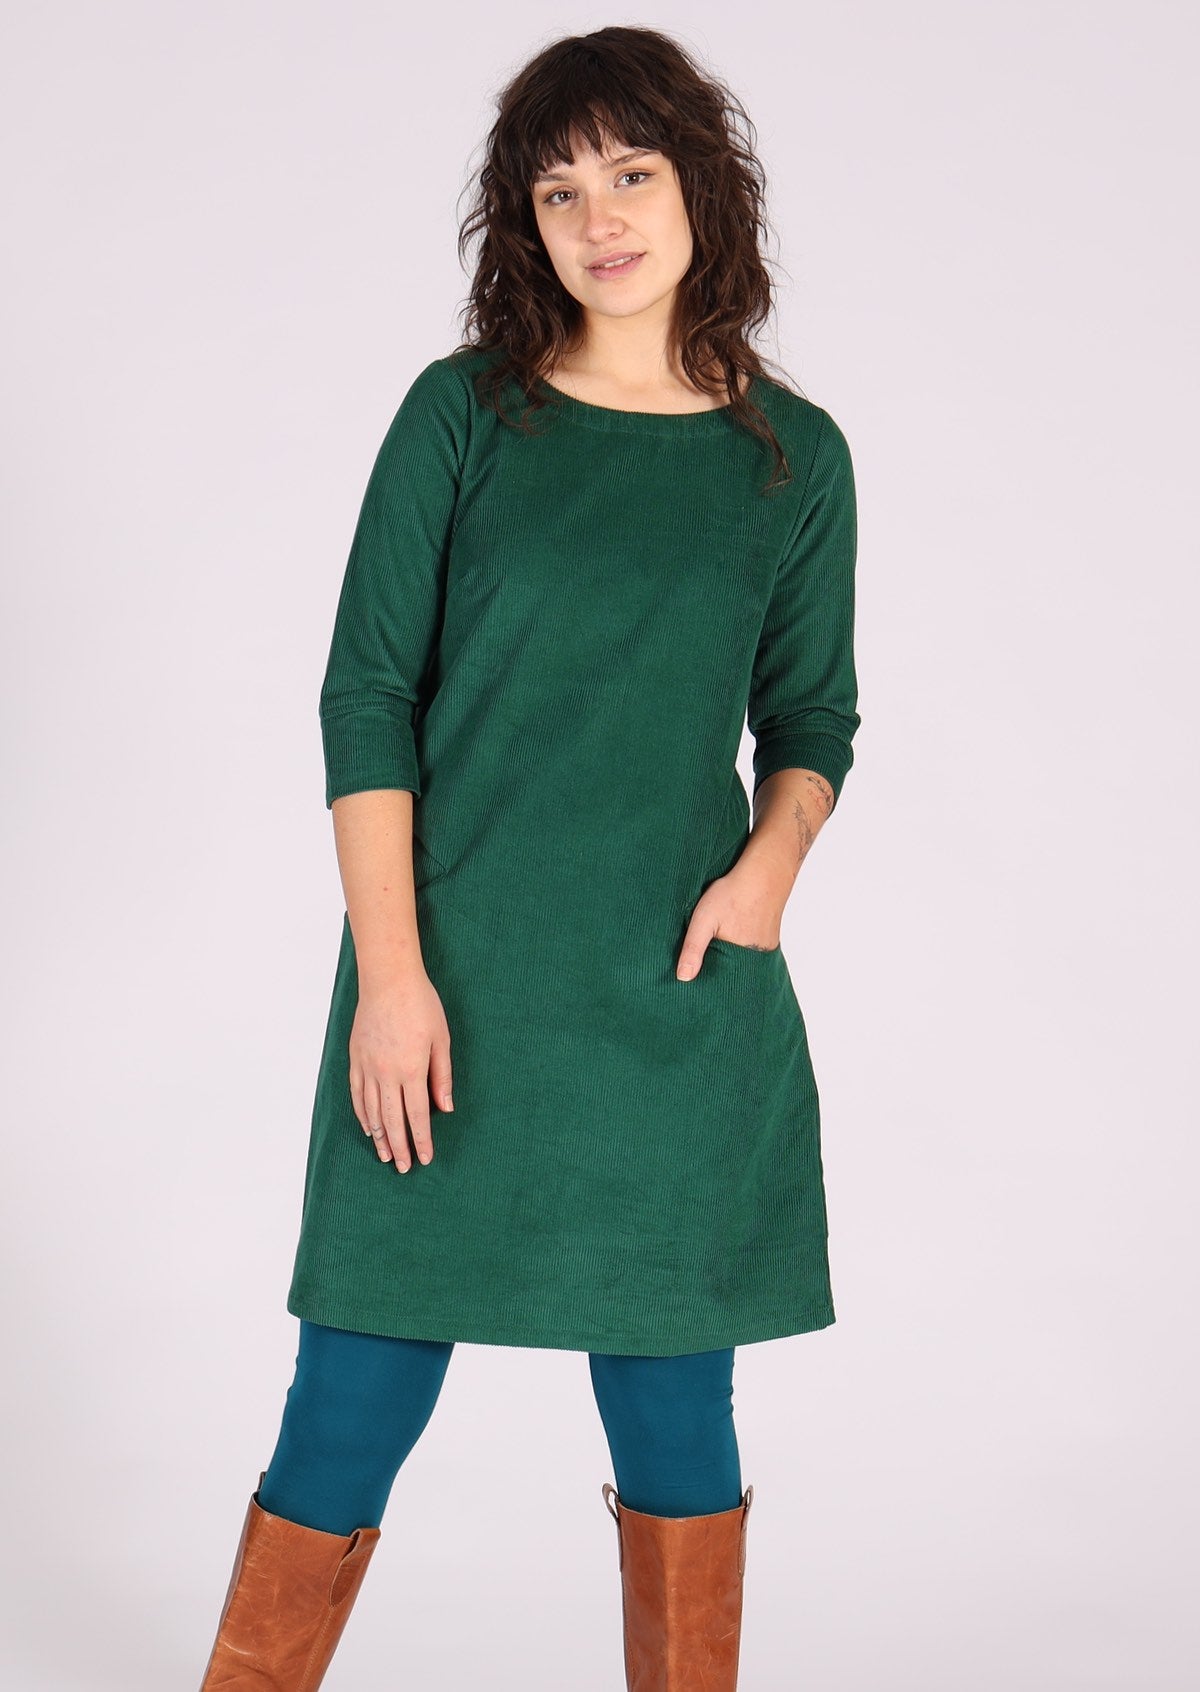 Green corduroy dress with pockets and side zip